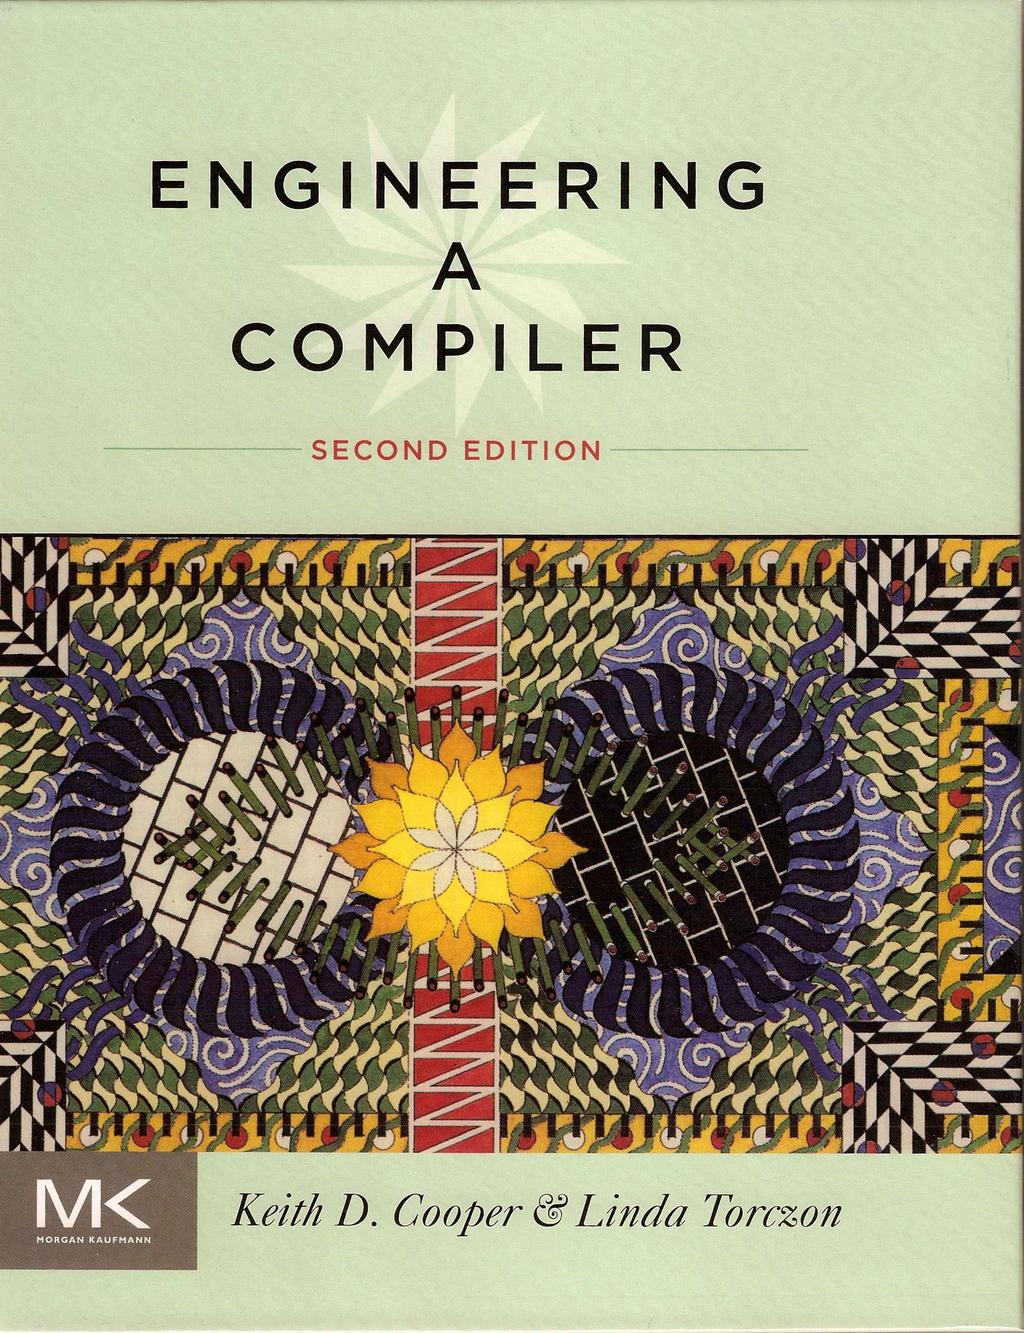 Occasionally, I ll distribute supplemental materials in class to cover topics that are not easy to find elsewhere. Title: Compilers: Principles, Techniques and Tools Authors: A. Aho, M. Lam, R.